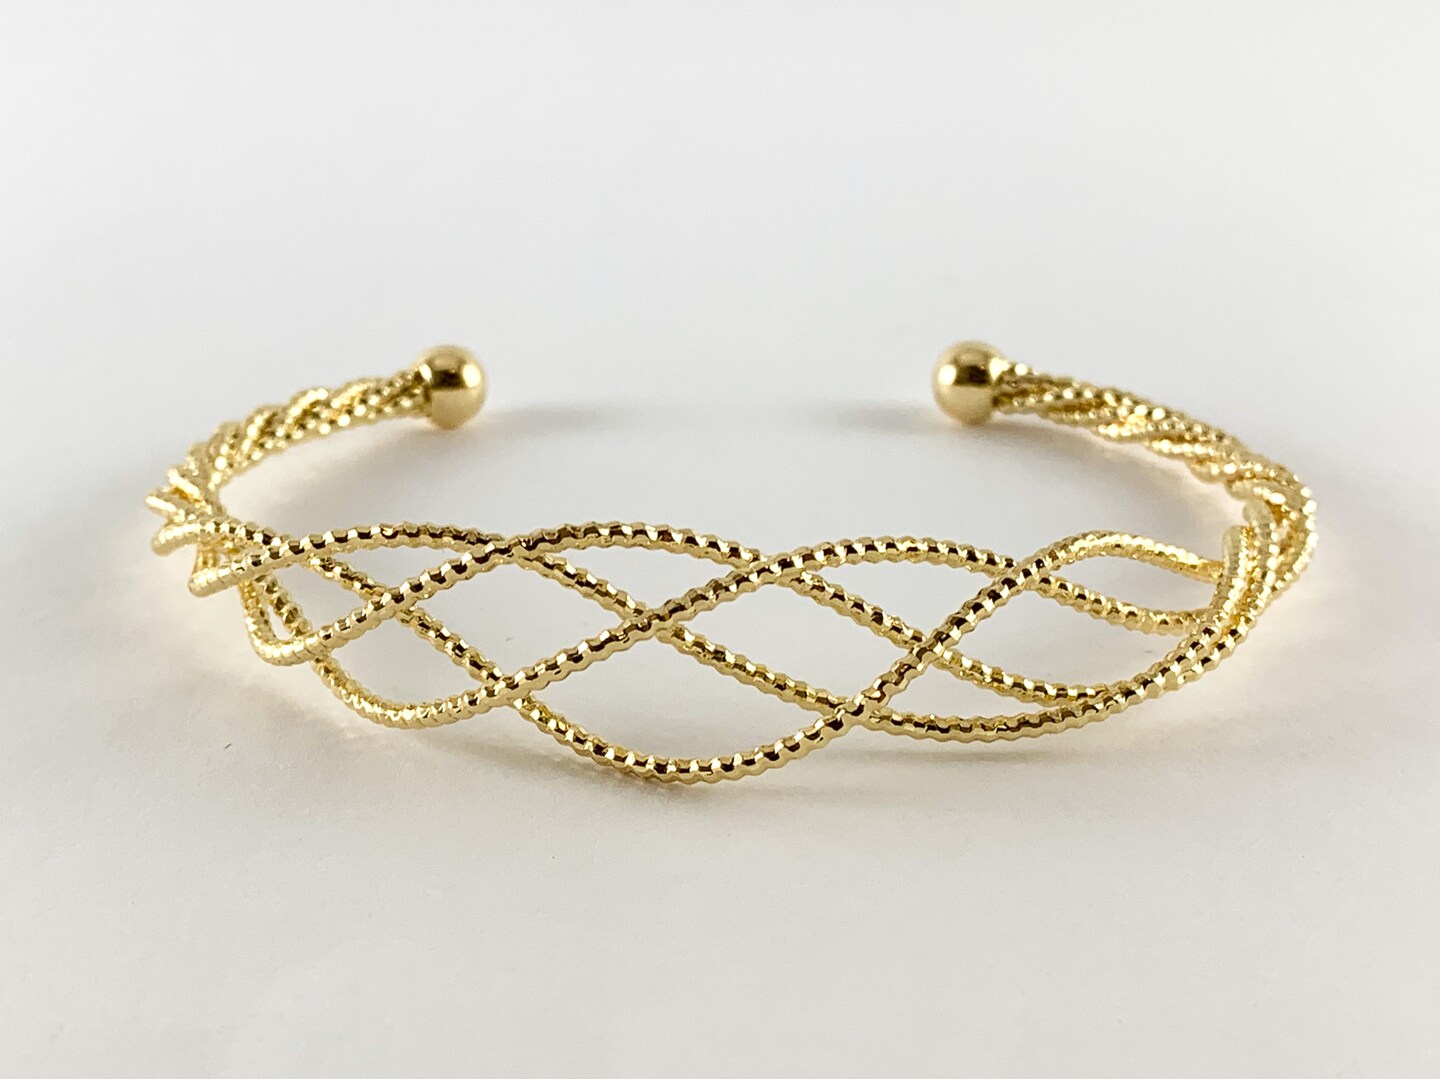 Real Gold 18K Plated Copper Twisted Filigree Shiny Adjustable Bracelet Cuffs 1 pc